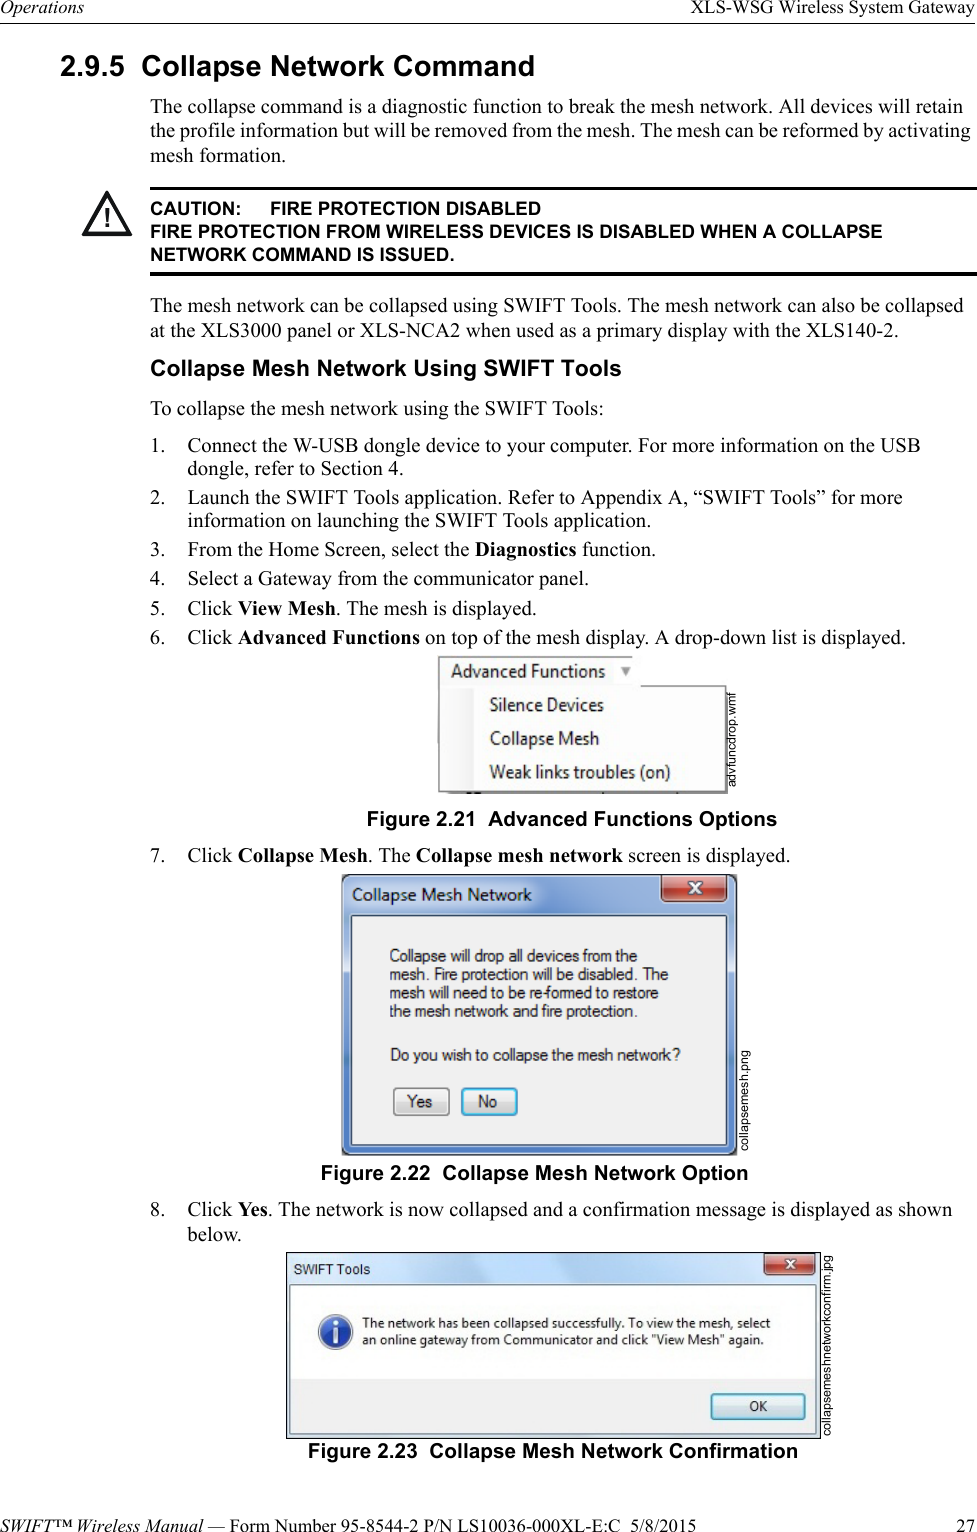 SWIFT™ Wireless Manual — Form Number 95-8544-2 P/N LS10036-000XL-E:C  5/8/2015  27Operations XLS-WSG Wireless System Gateway2.9.5  Collapse Network CommandThe collapse command is a diagnostic function to break the mesh network. All devices will retain the profile information but will be removed from the mesh. The mesh can be reformed by activating mesh formation.The mesh network can be collapsed using SWIFT Tools. The mesh network can also be collapsed at the XLS3000 panel or XLS-NCA2 when used as a primary display with the XLS140-2.Collapse Mesh Network Using SWIFT ToolsTo collapse the mesh network using the SWIFT Tools:1. Connect the W-USB dongle device to your computer. For more information on the USB dongle, refer to Section 4.2. Launch the SWIFT Tools application. Refer to Appendix A, “SWIFT Tools” for more information on launching the SWIFT Tools application.3. From the Home Screen, select the Diagnostics function.4. Select a Gateway from the communicator panel.5. Click View Mesh. The mesh is displayed.6. Click Advanced Functions on top of the mesh display. A drop-down list is displayed.7. Click Collapse Mesh. The Collapse mesh network screen is displayed.8. Click Ye s . The network is now collapsed and a confirmation message is displayed as shown below. !CAUTION: FIRE PROTECTION DISABLEDFIRE PROTECTION FROM WIRELESS DEVICES IS DISABLED WHEN A COLLAPSE NETWORK COMMAND IS ISSUED.advfuncdrop.wmfFigure 2.21  Advanced Functions Optionscollapsemesh.pngFigure 2.22  Collapse Mesh Network Optioncollapsemeshnetworkconfirm.jpgFigure 2.23  Collapse Mesh Network Confirmation